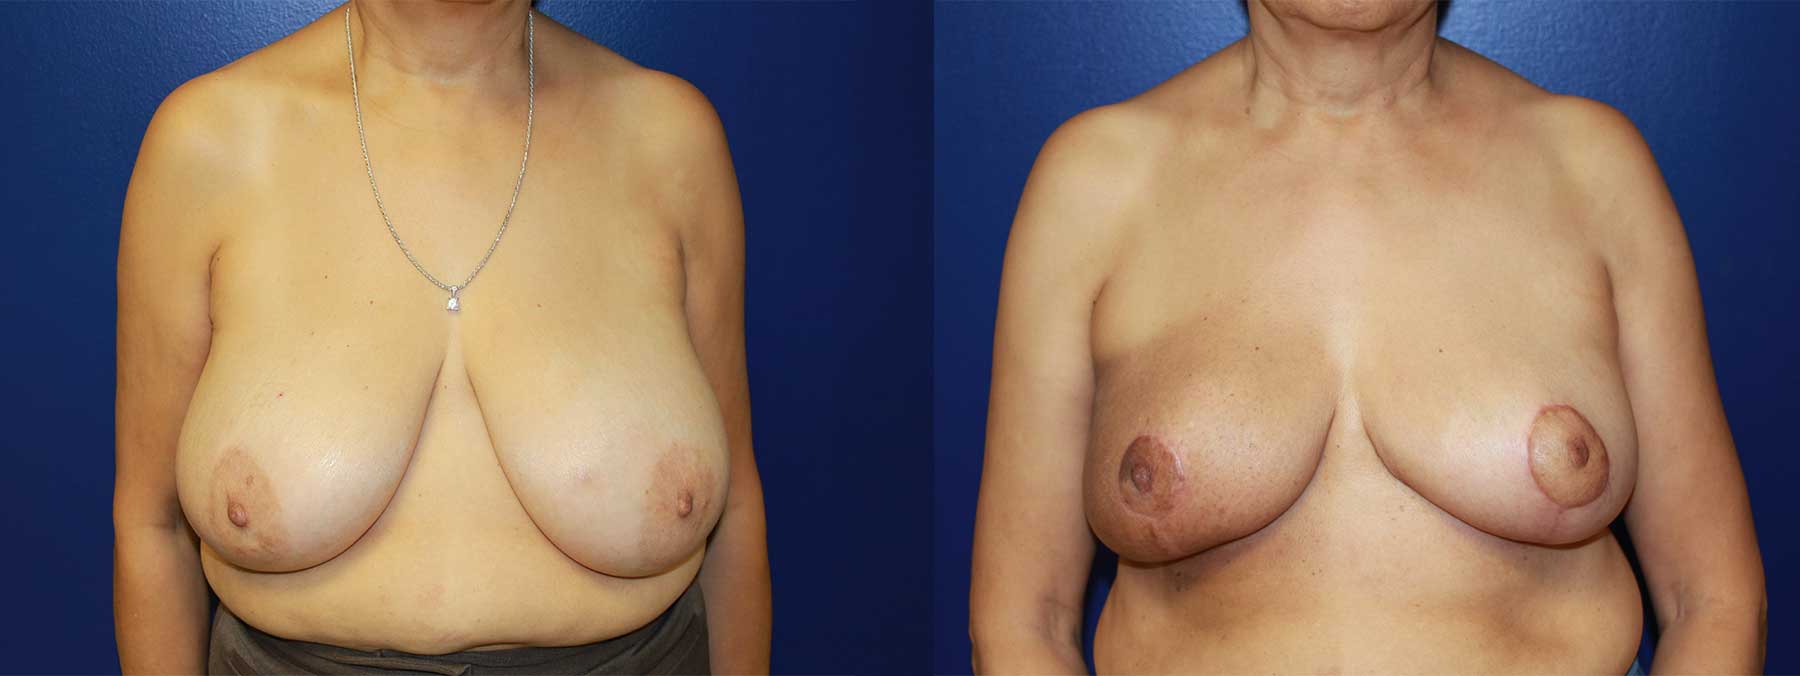 Before and After Image of Oncoplastic Breast Reconstruction